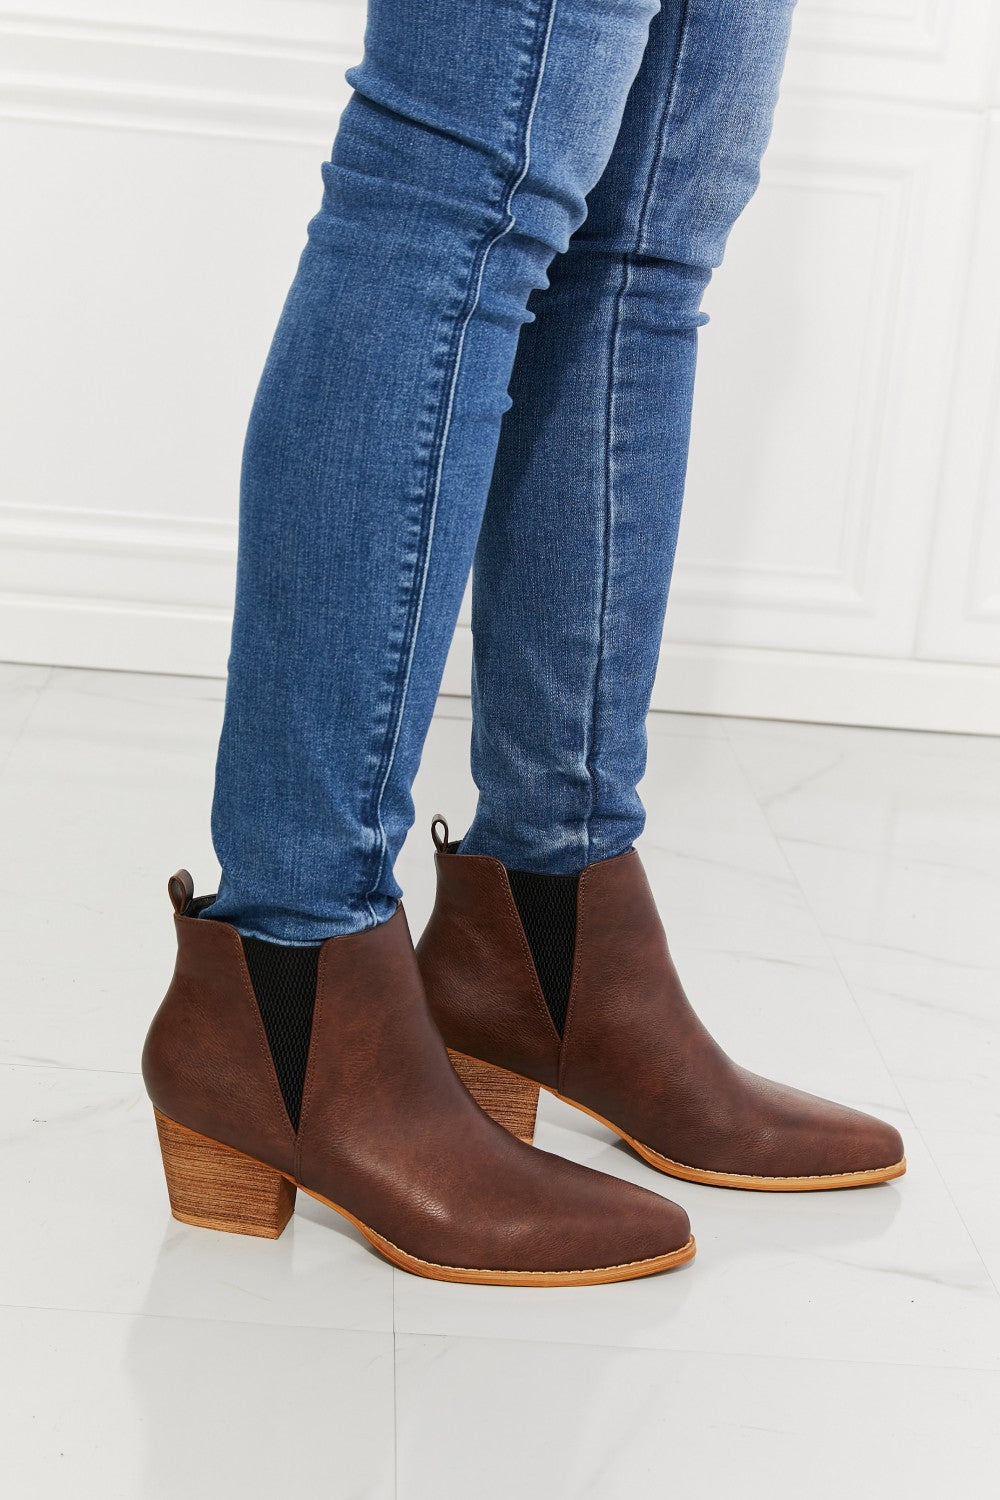 MMShoes Cowboy Style Point Toe Ankle Bootie Boots Stacked Heel in Chocolate Back At It